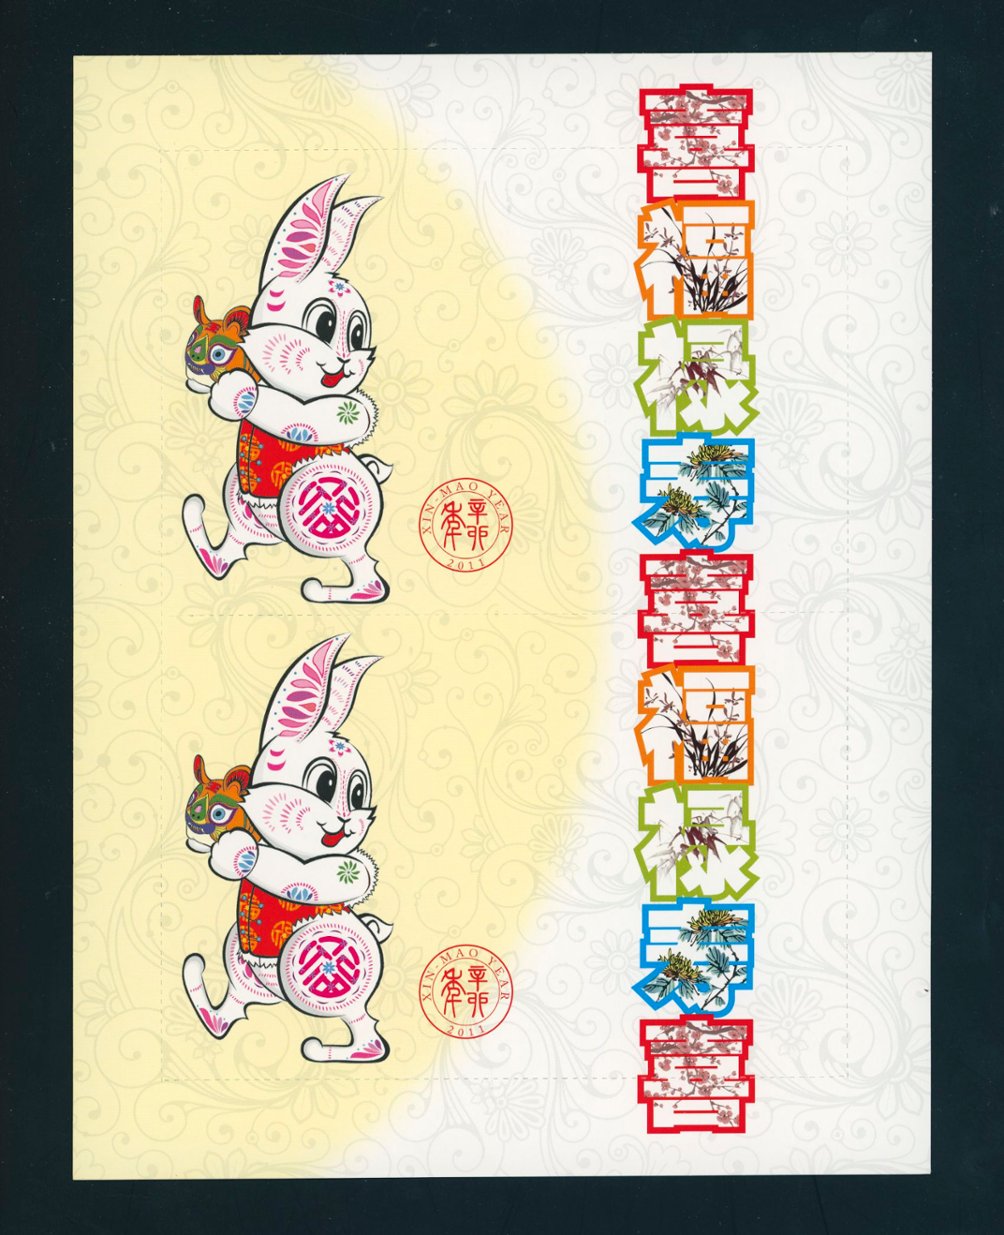 2011 Year of the Rabbit postcards (two) in unbroken sheet